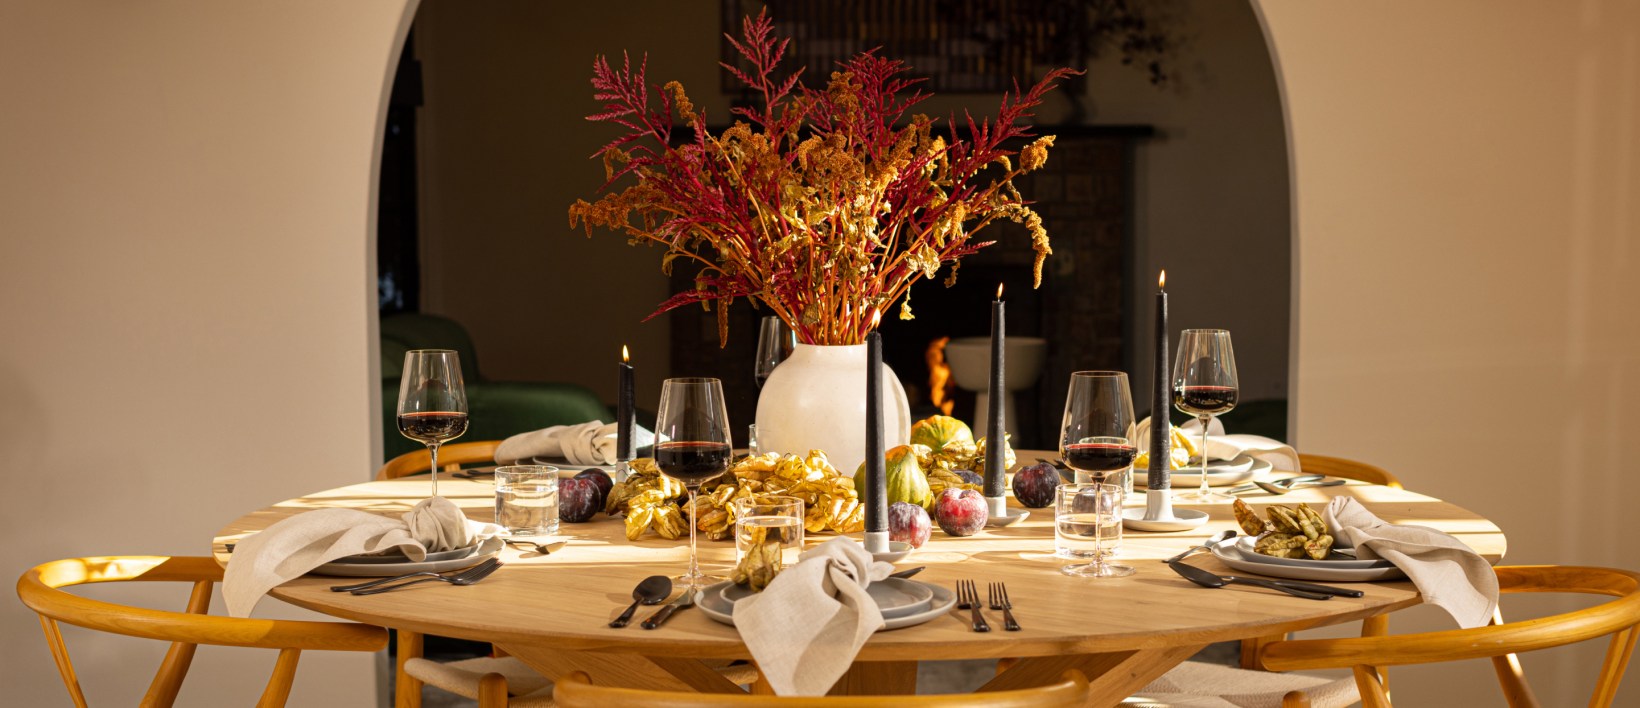 Fall inspired dining table setting.